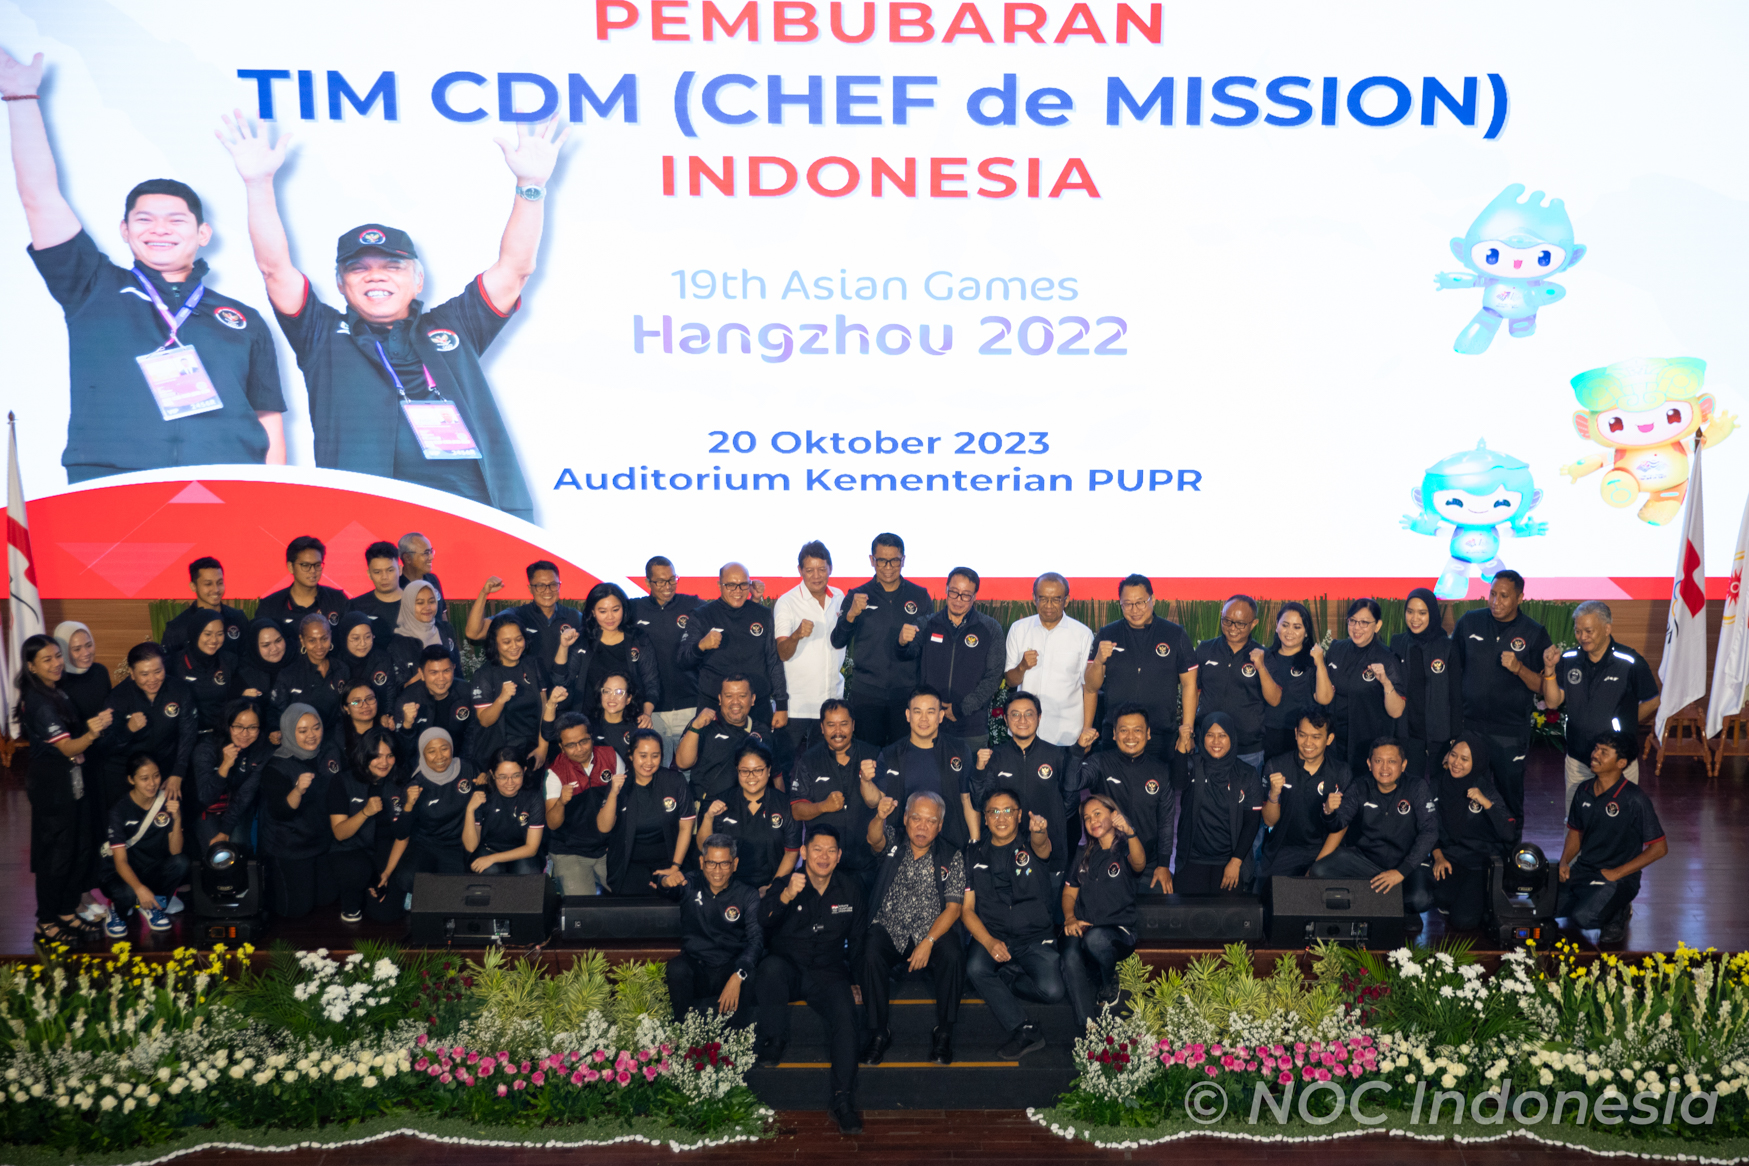 Indonesia Olympic Commitee - Disbandment of the 2022 Hangzhou Asian Games Chef de Mission Team